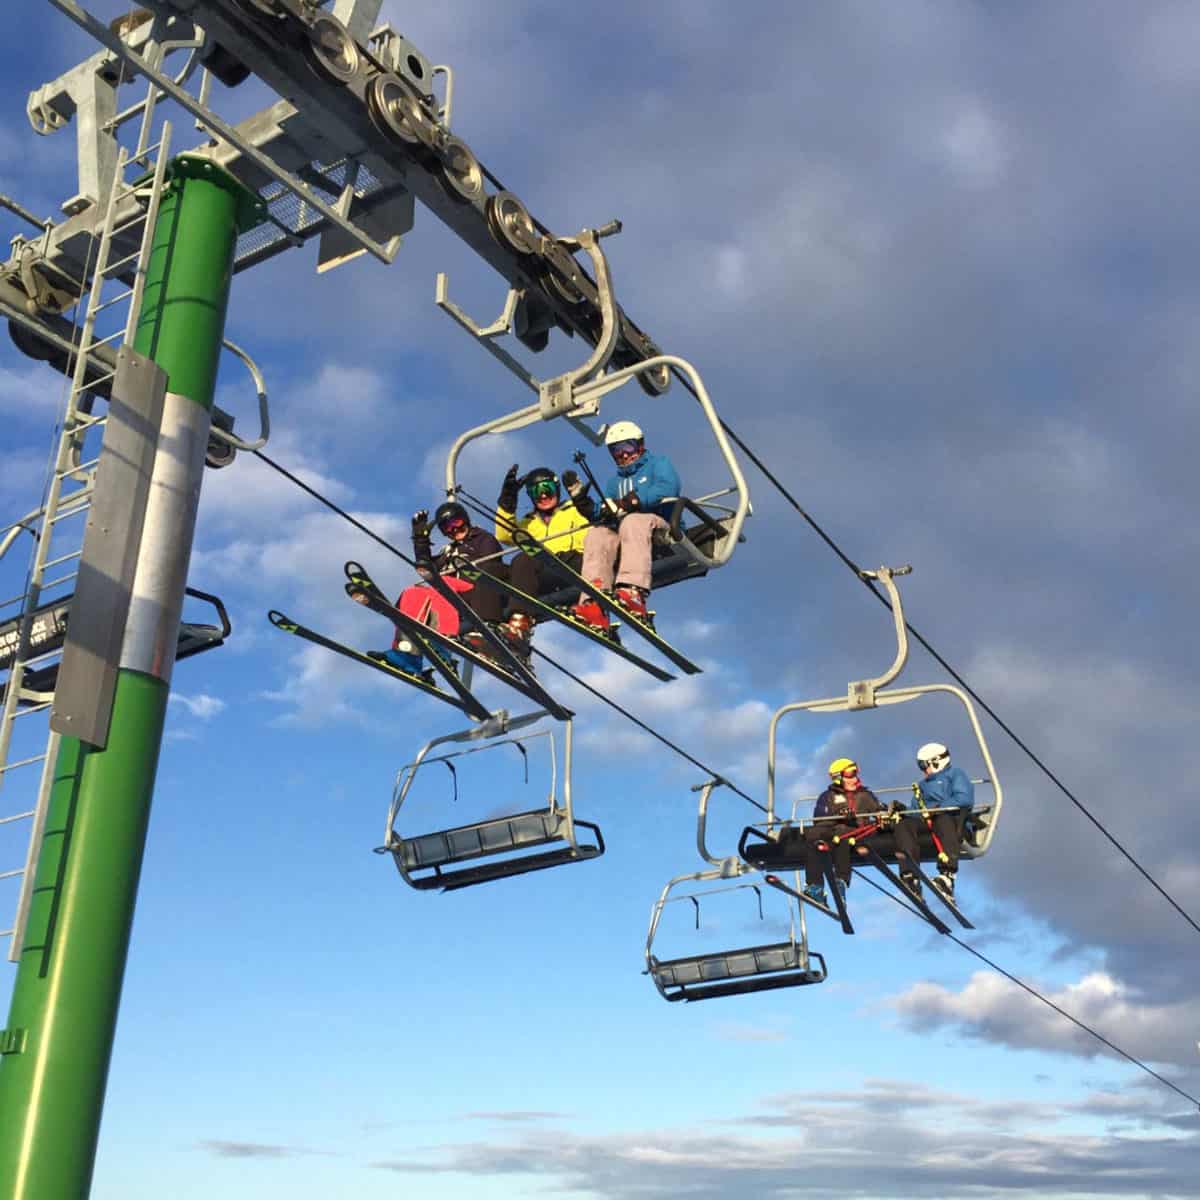 Skiers on the lift at Snow Valley Ski HIll